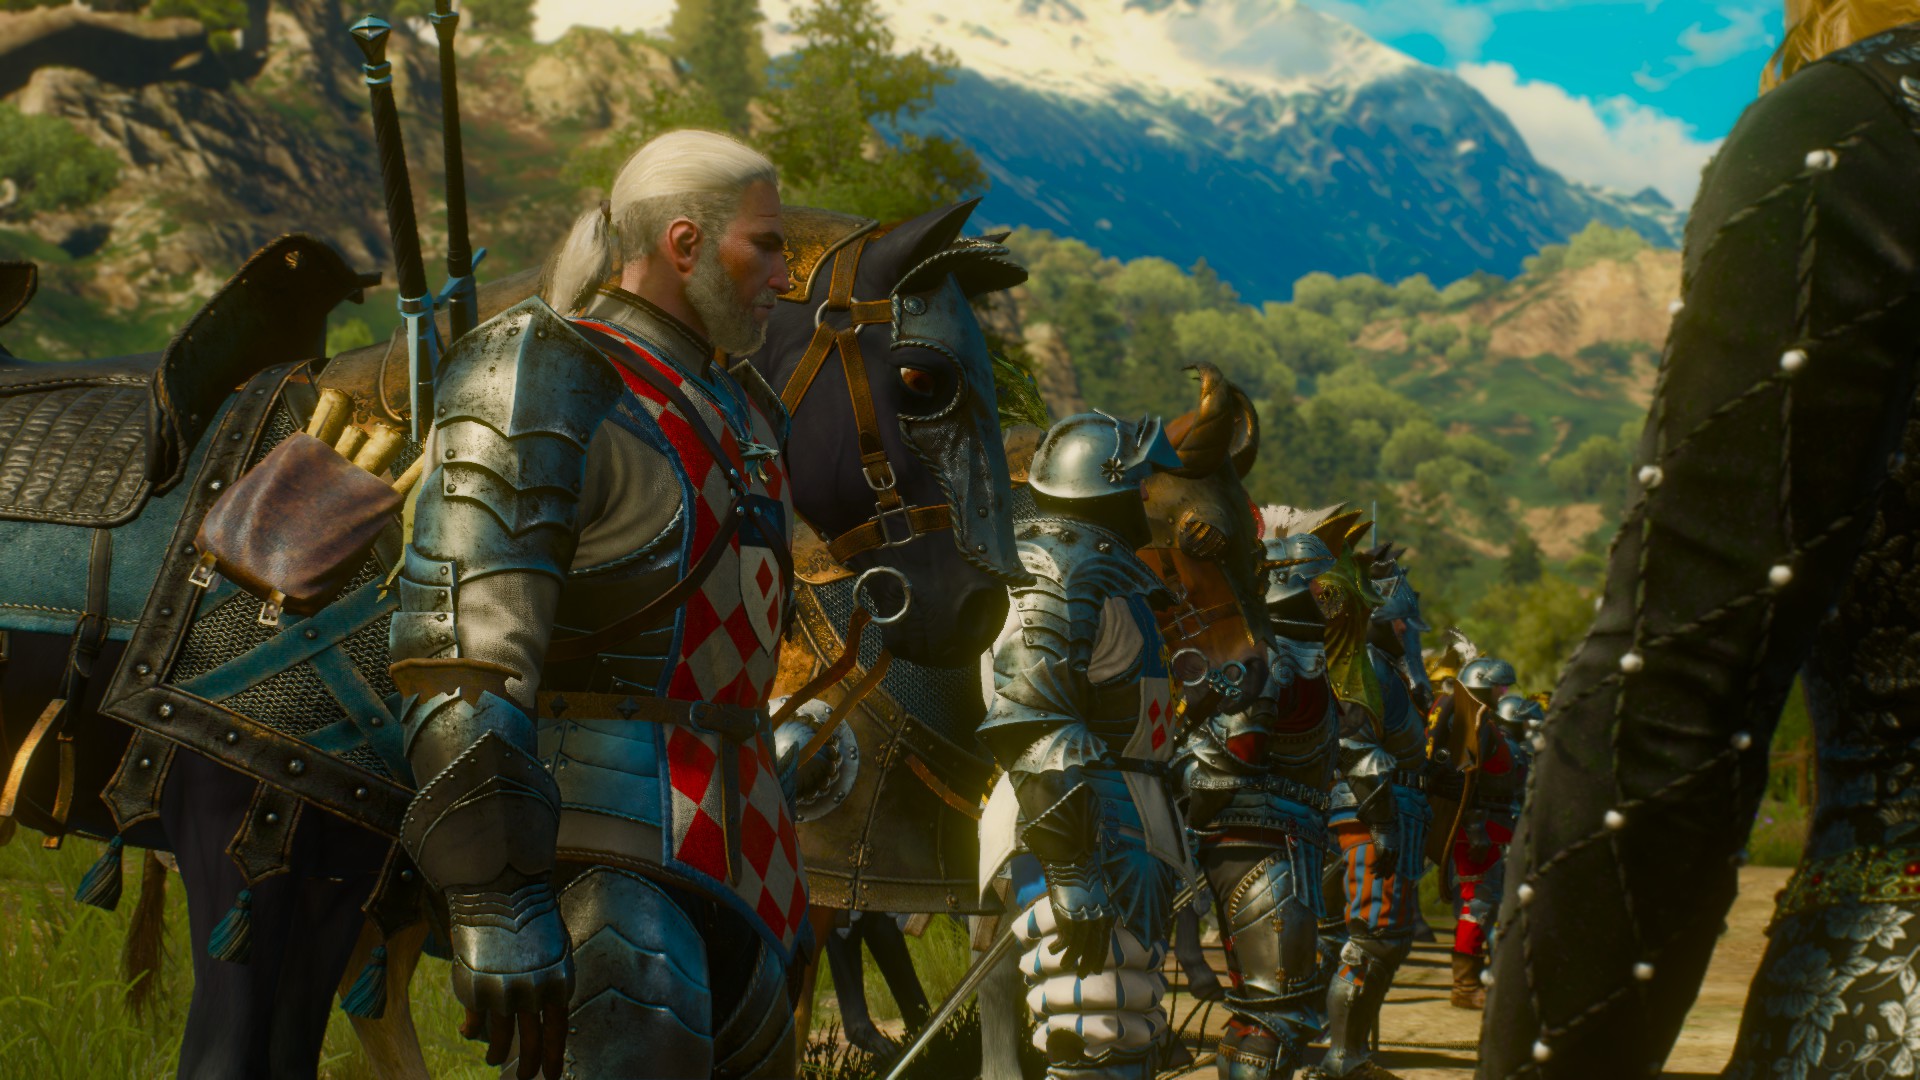 The Video Games Of 2017, As Screenshots From The Witcher 3